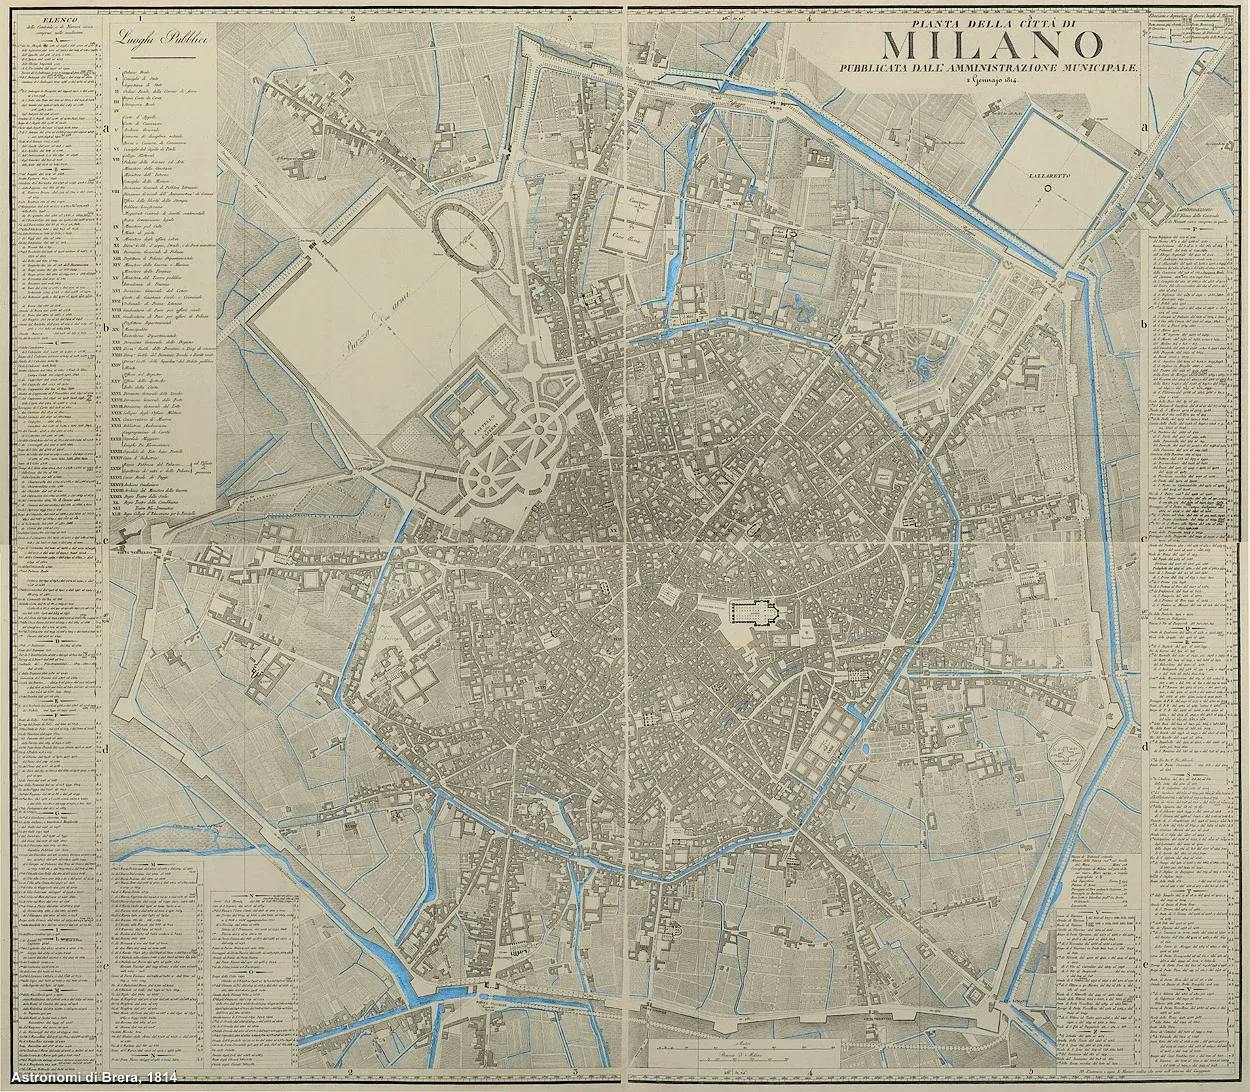 Highlighted in blue the ancient water channels (Astronomi di Brera, 1814)